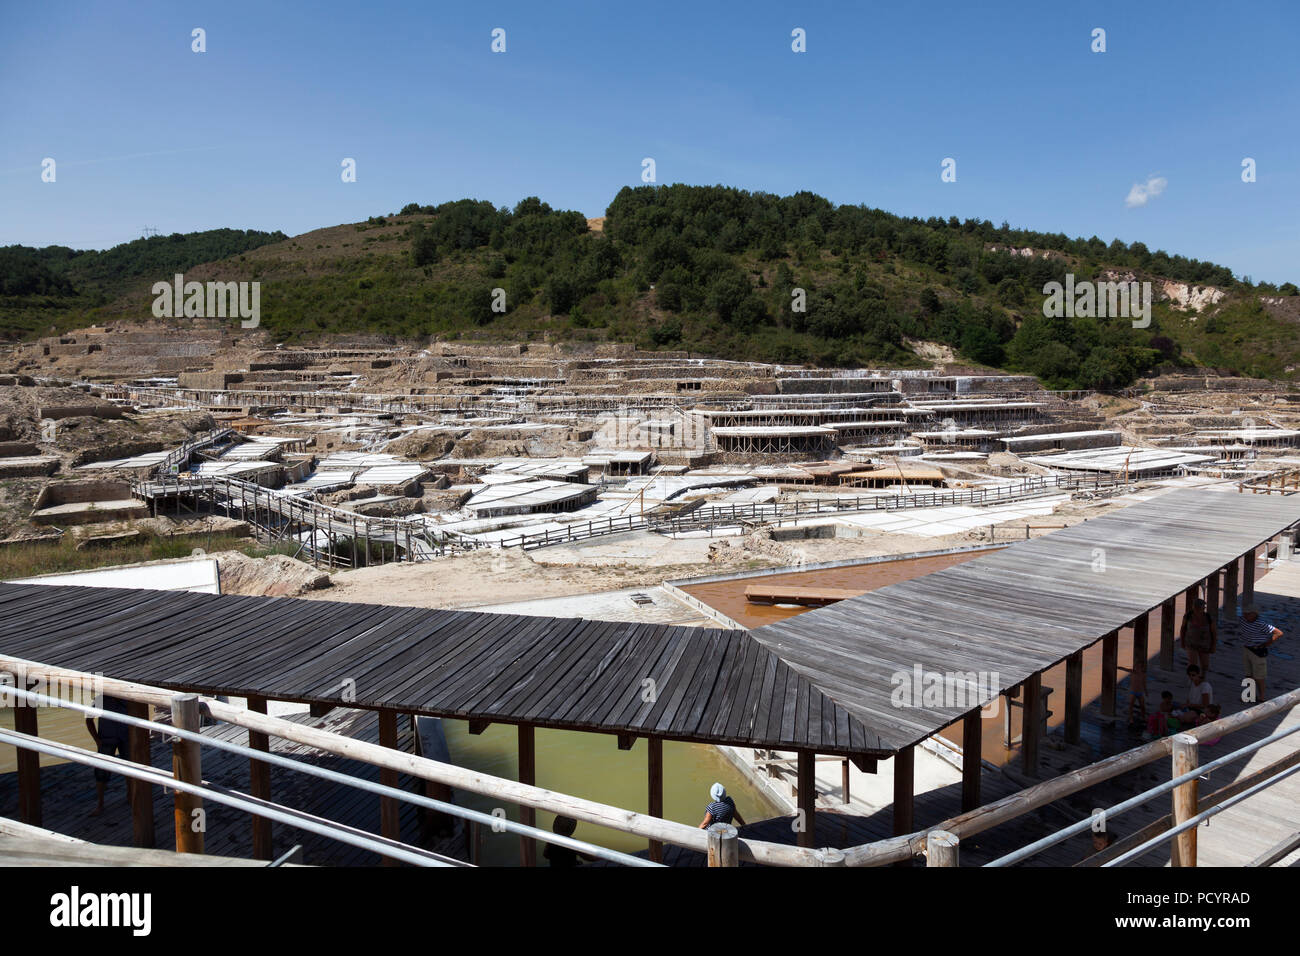 Ancient salt pans in Añana, Basque Country, Spain Stock Photo